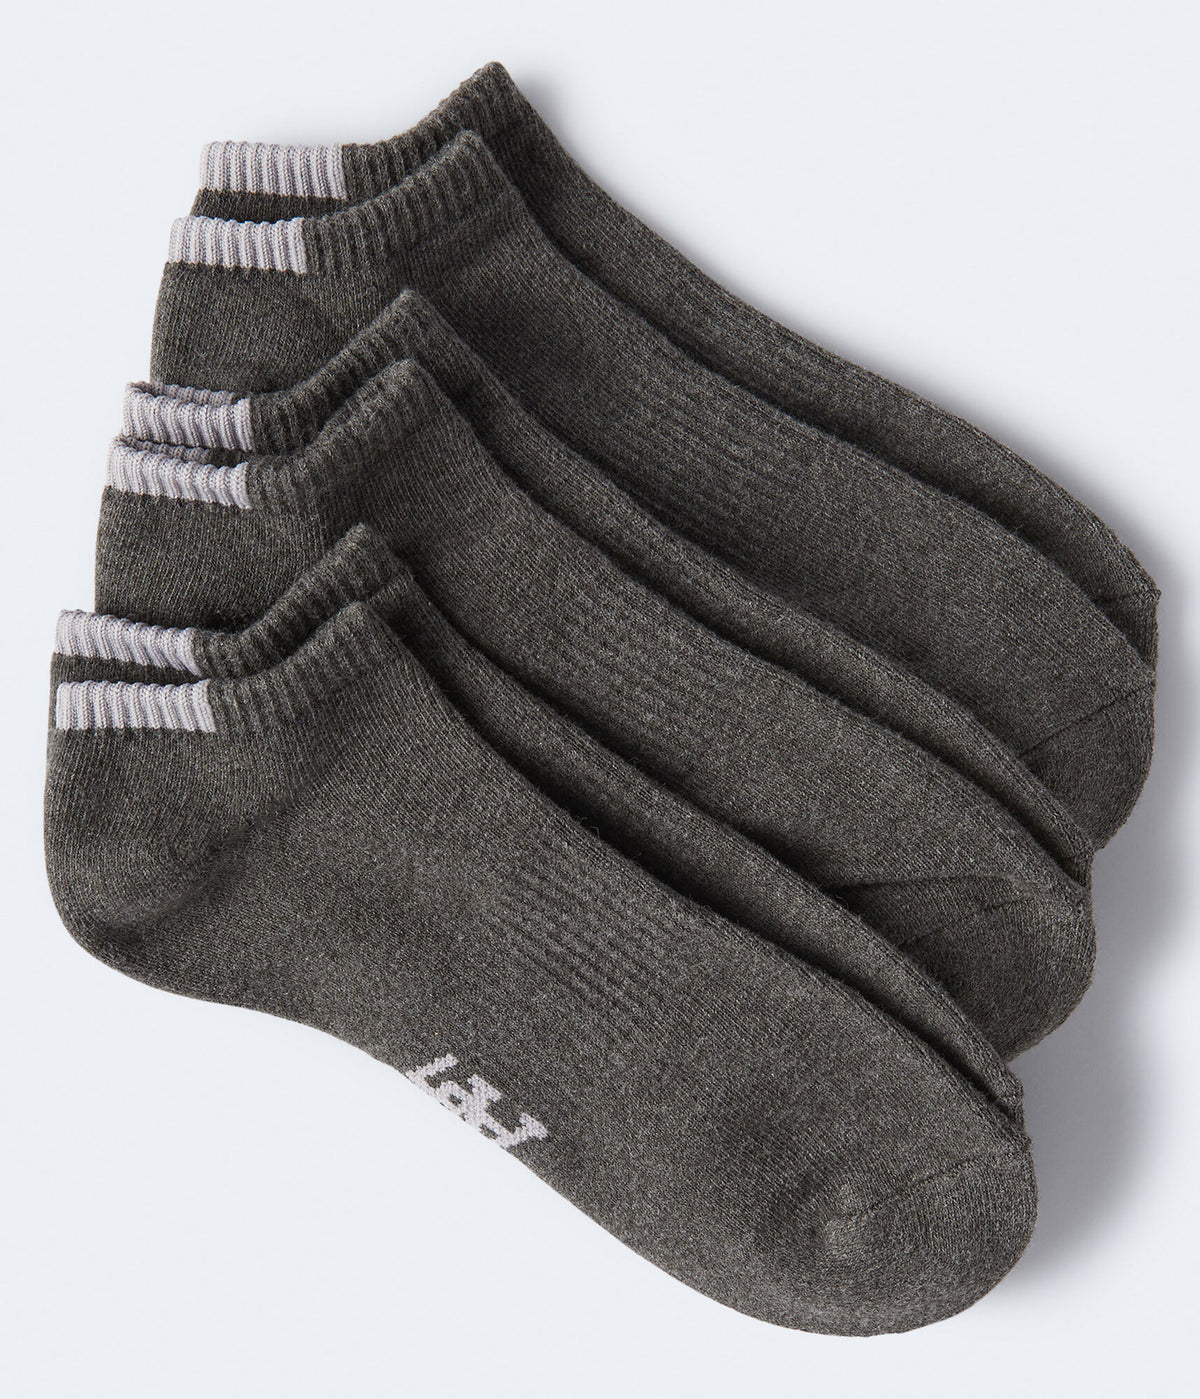 Aeropostale Mens' 3-Pack Solid Ankle Socks - Dark Grey - Size One Size - Cotton - Teen Fashion & Clothing Charcoal Heather Grey